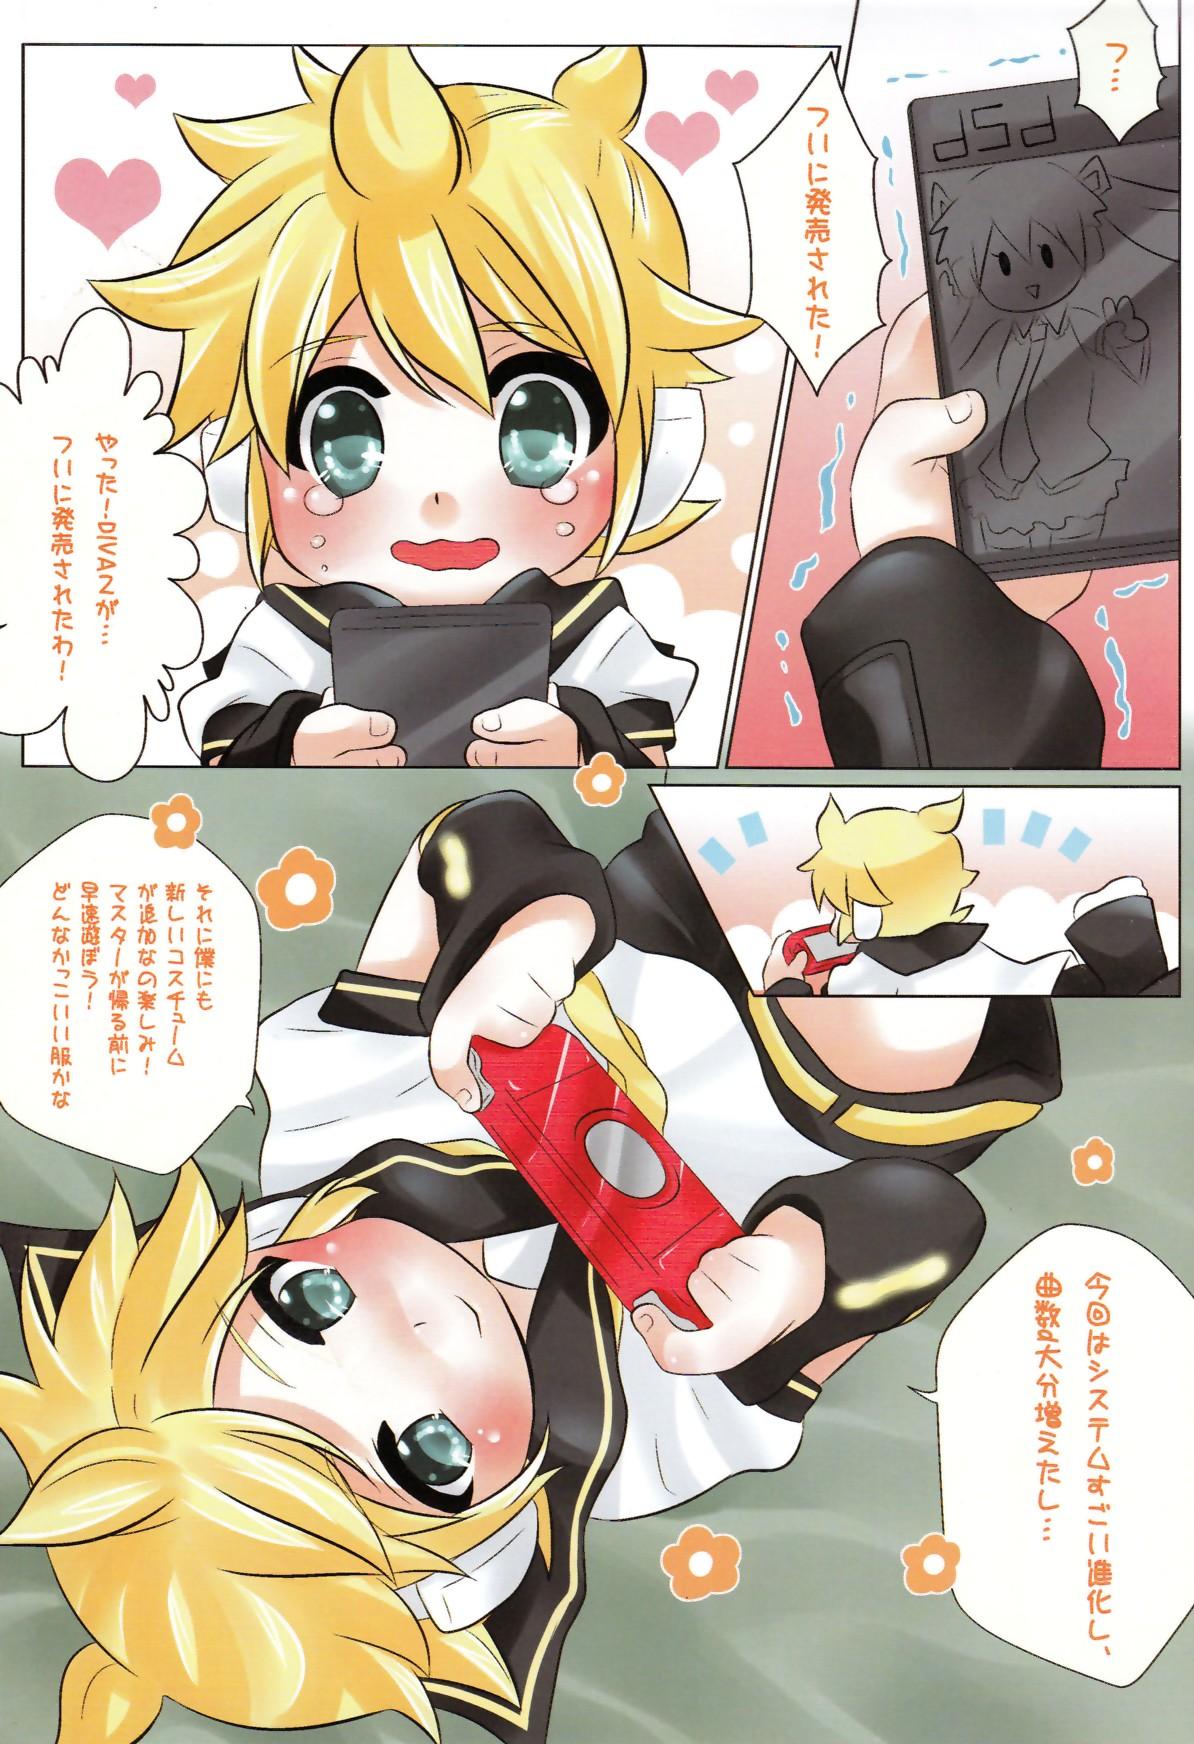 Submissive Project Len-kyun 2 - Vocaloid Nudist - Page 3